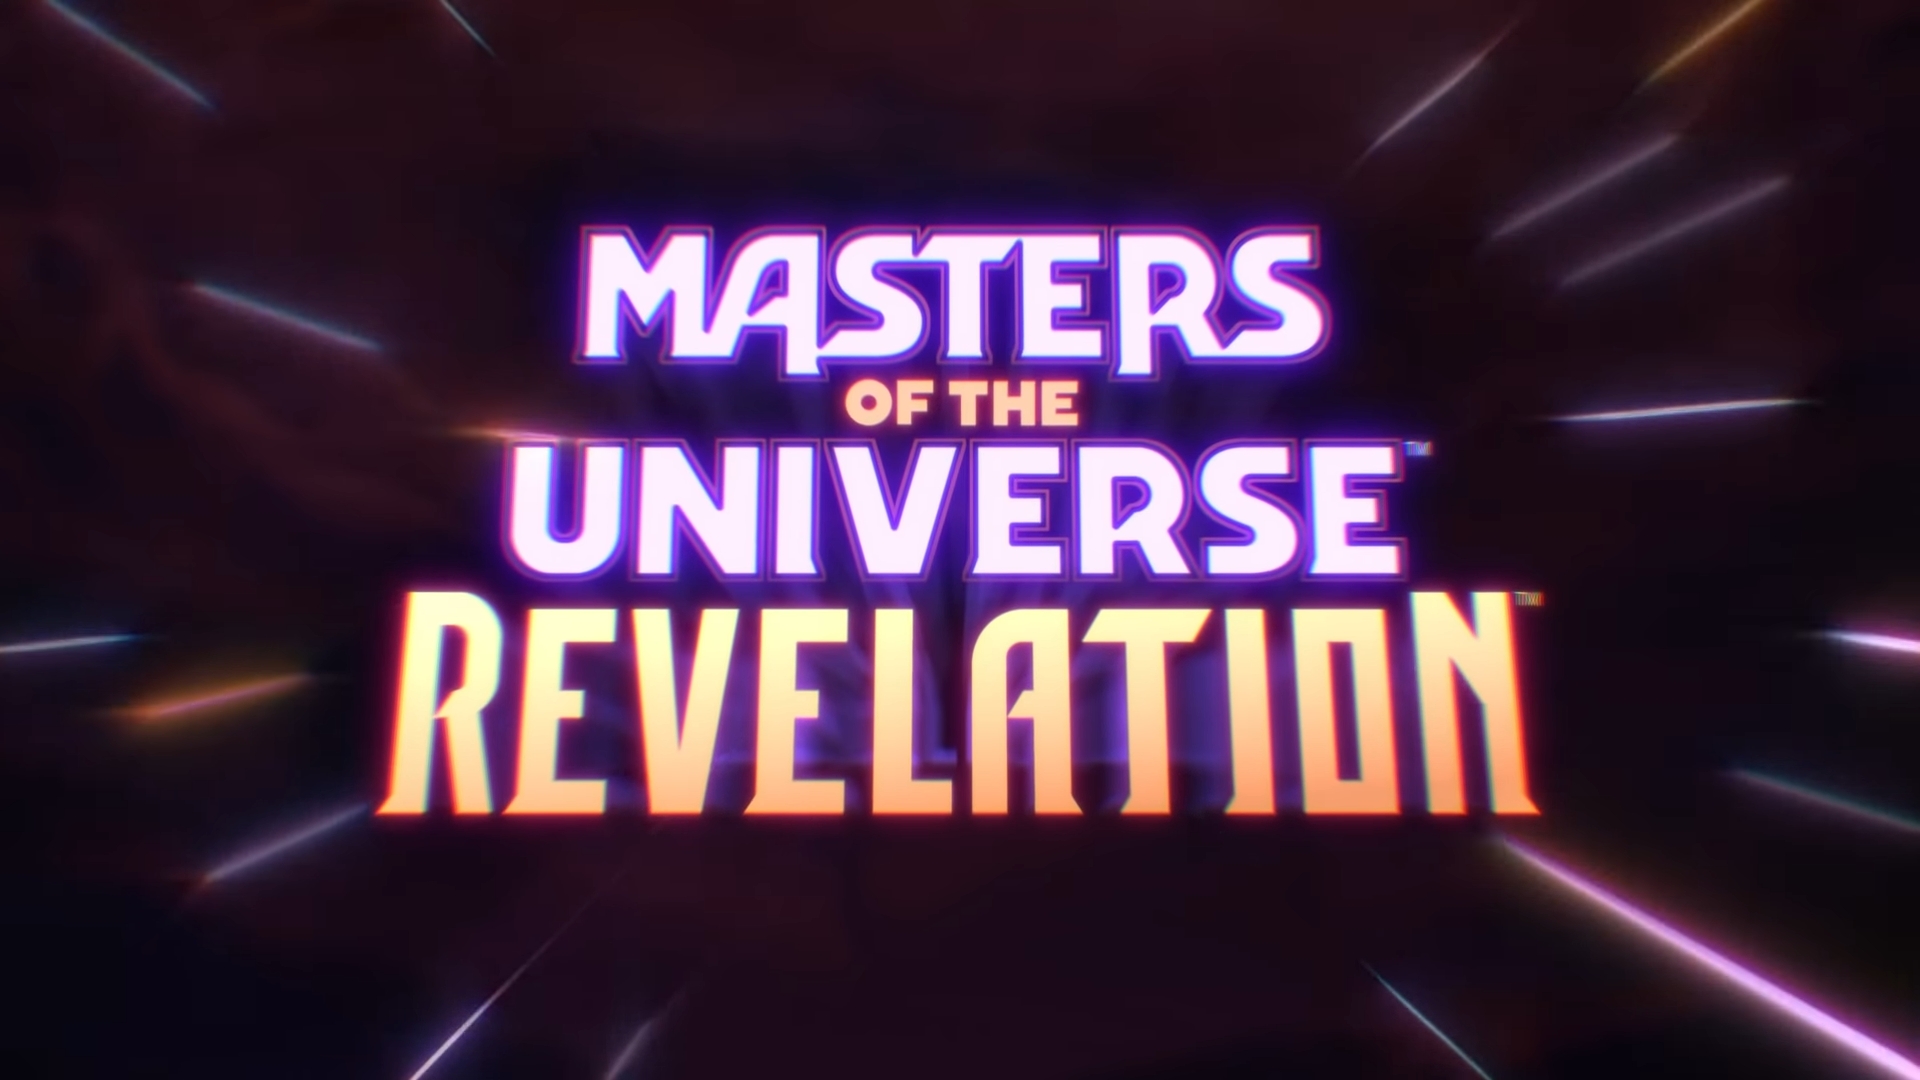 Masters Of The Universe Revelation Netflix Wallpapers